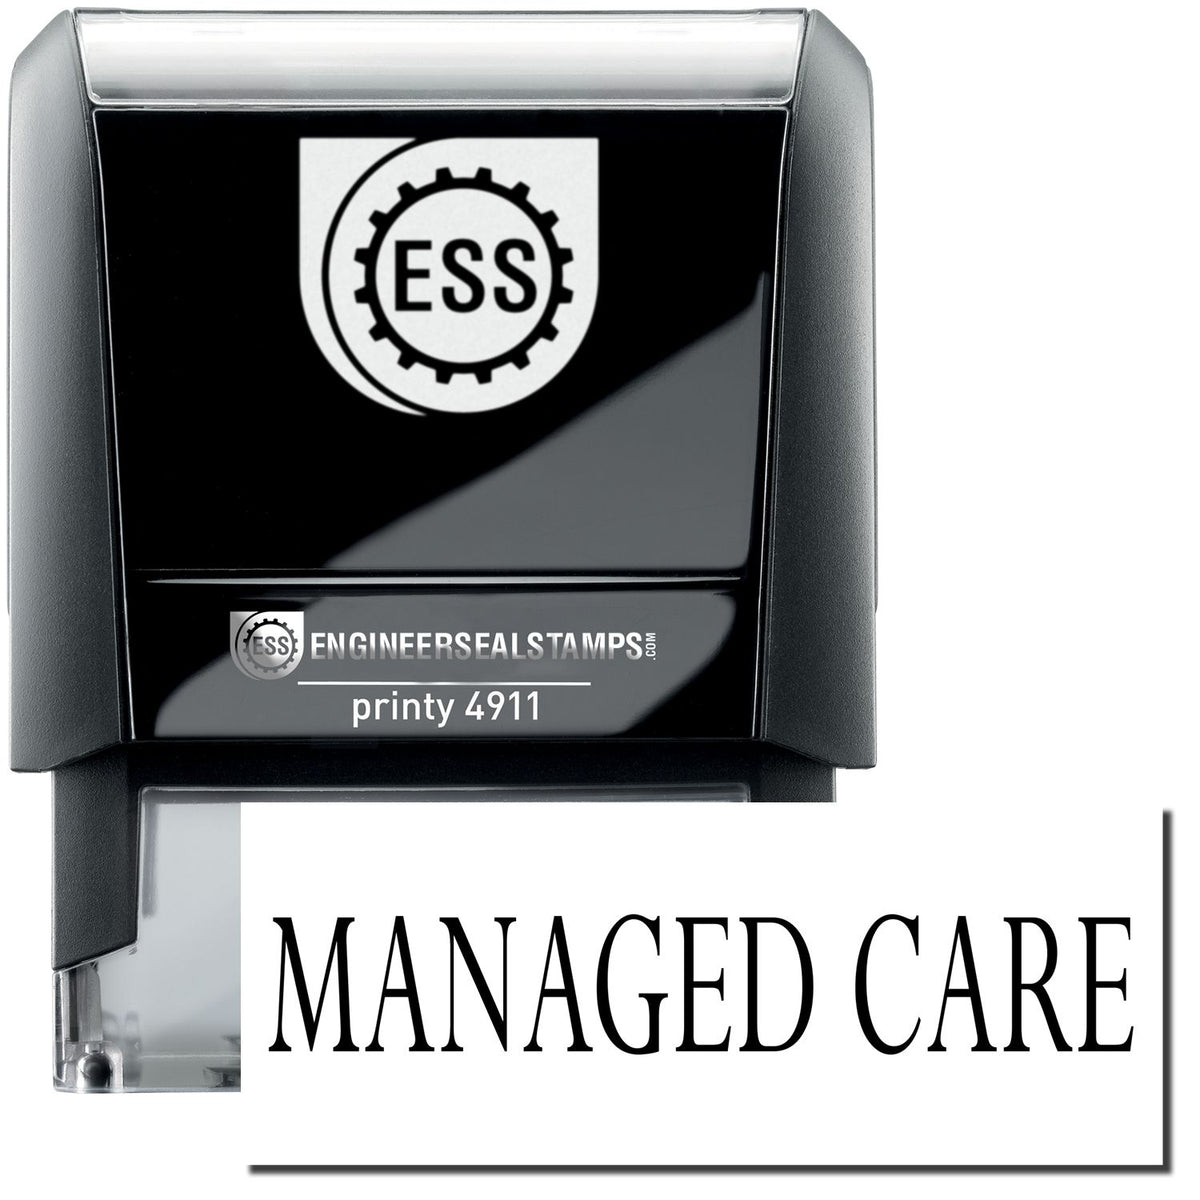 A self-inking stamp with a stamped image showing how the text &quot;MANAGED CARE&quot; is displayed after stamping.